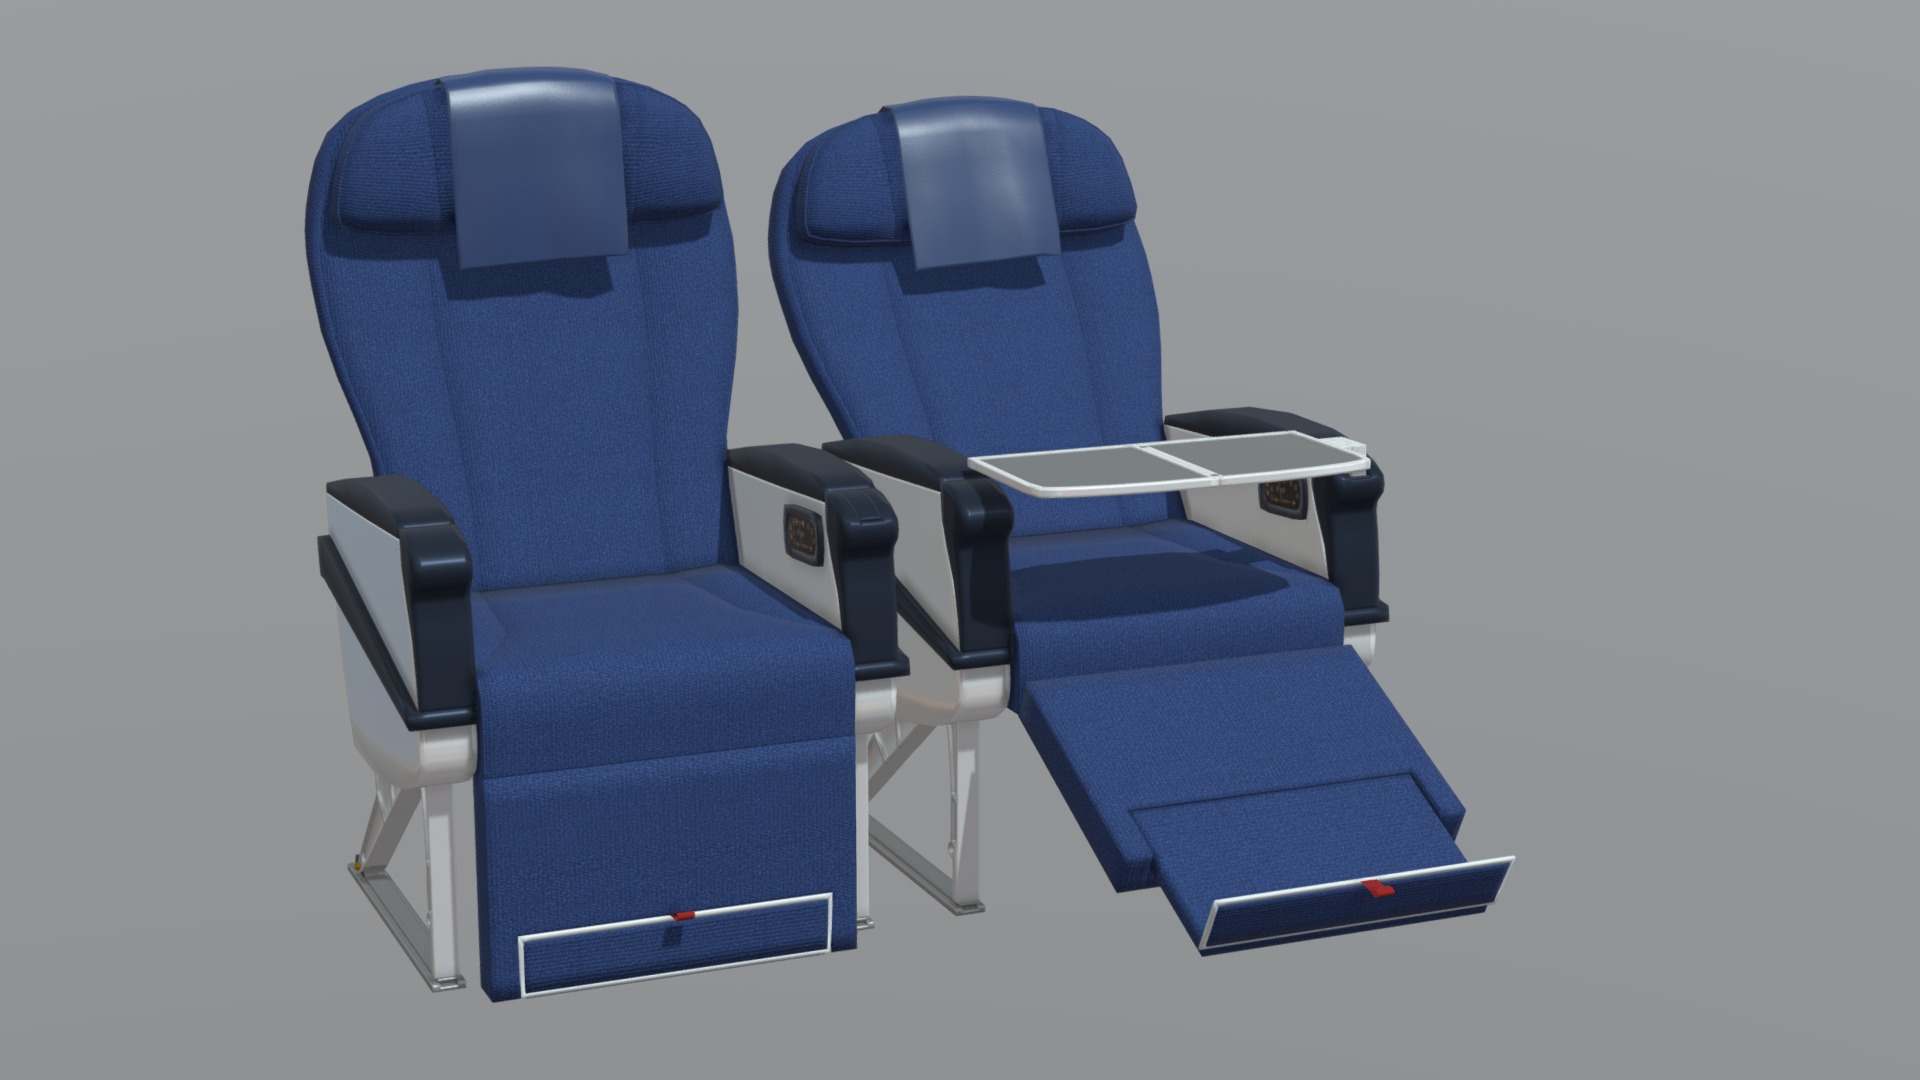 3D model Aircraft Chair 7 - This is a 3D model of the Aircraft Chair 7. The 3D model is about a group of blue chairs.